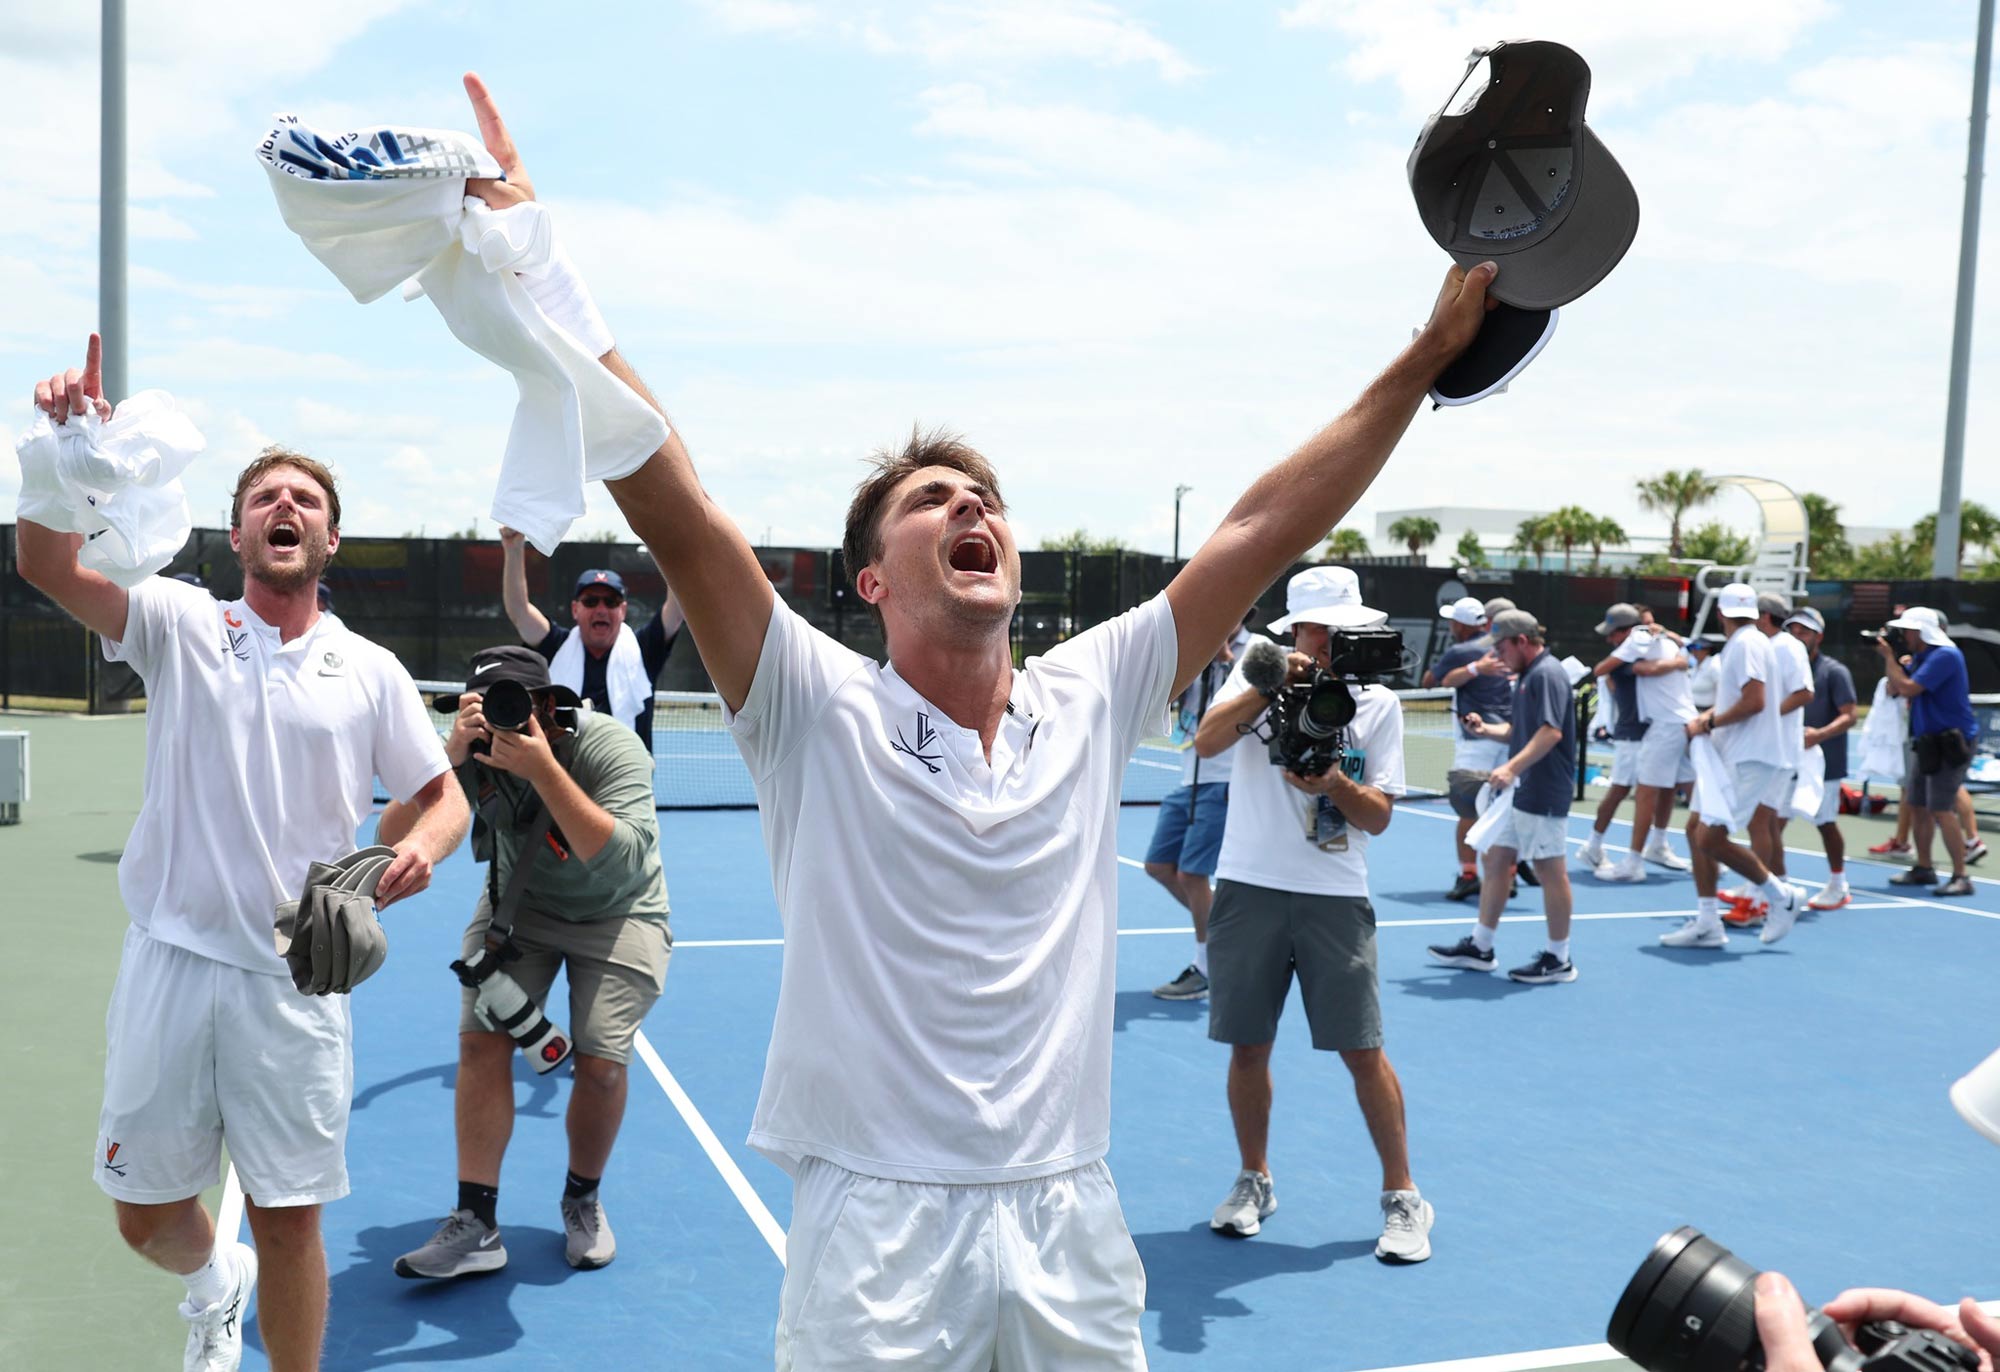 Tennis player in the foreground with both hands thrown up and pointing in celebration